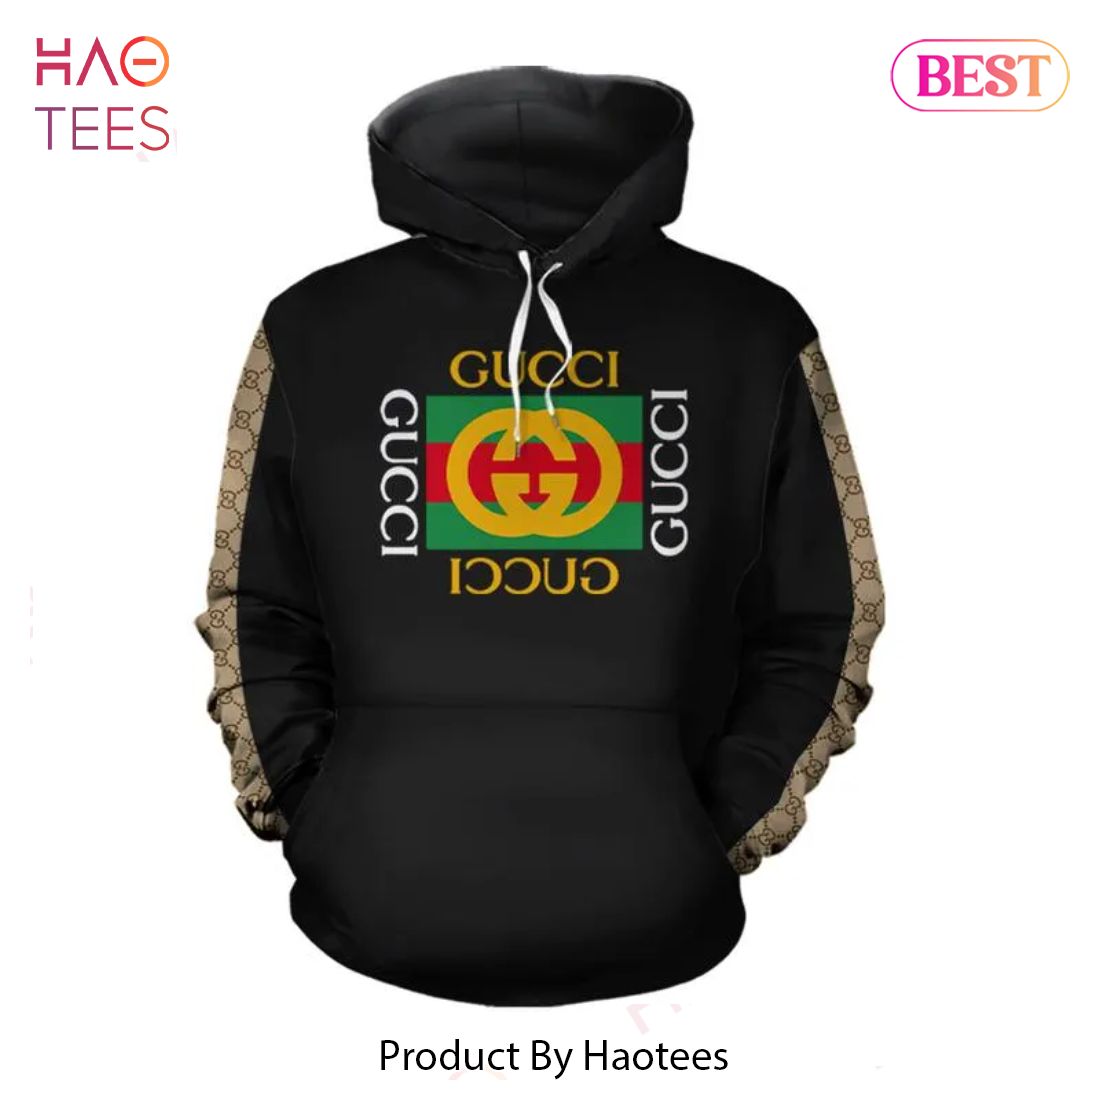 Gucci Black Unisex Hoodie For Men Women Luxury Brand Clothing Clothes Outfit